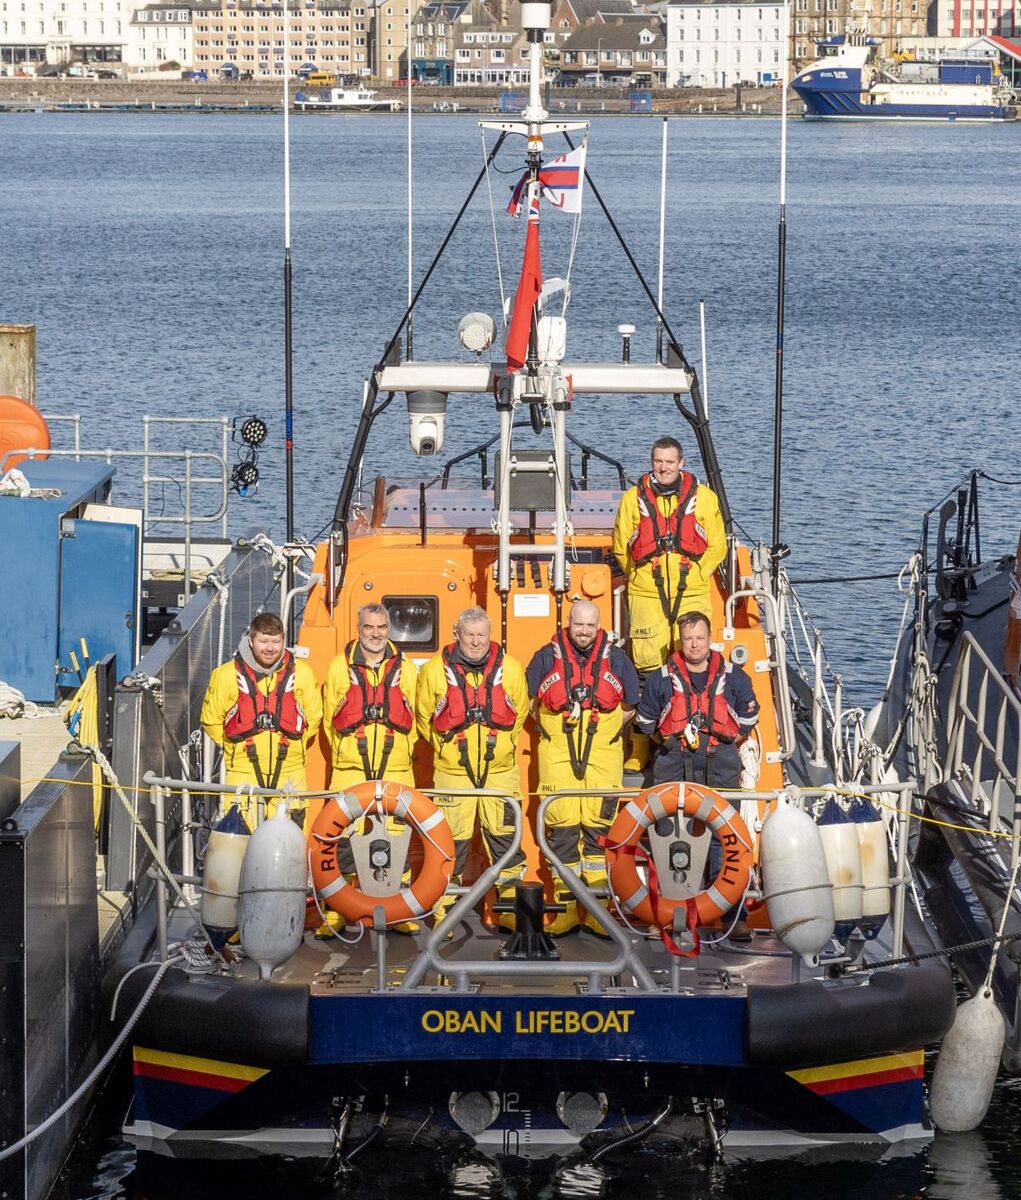 New lifeboat starts work as local RNLI team marks 200 years